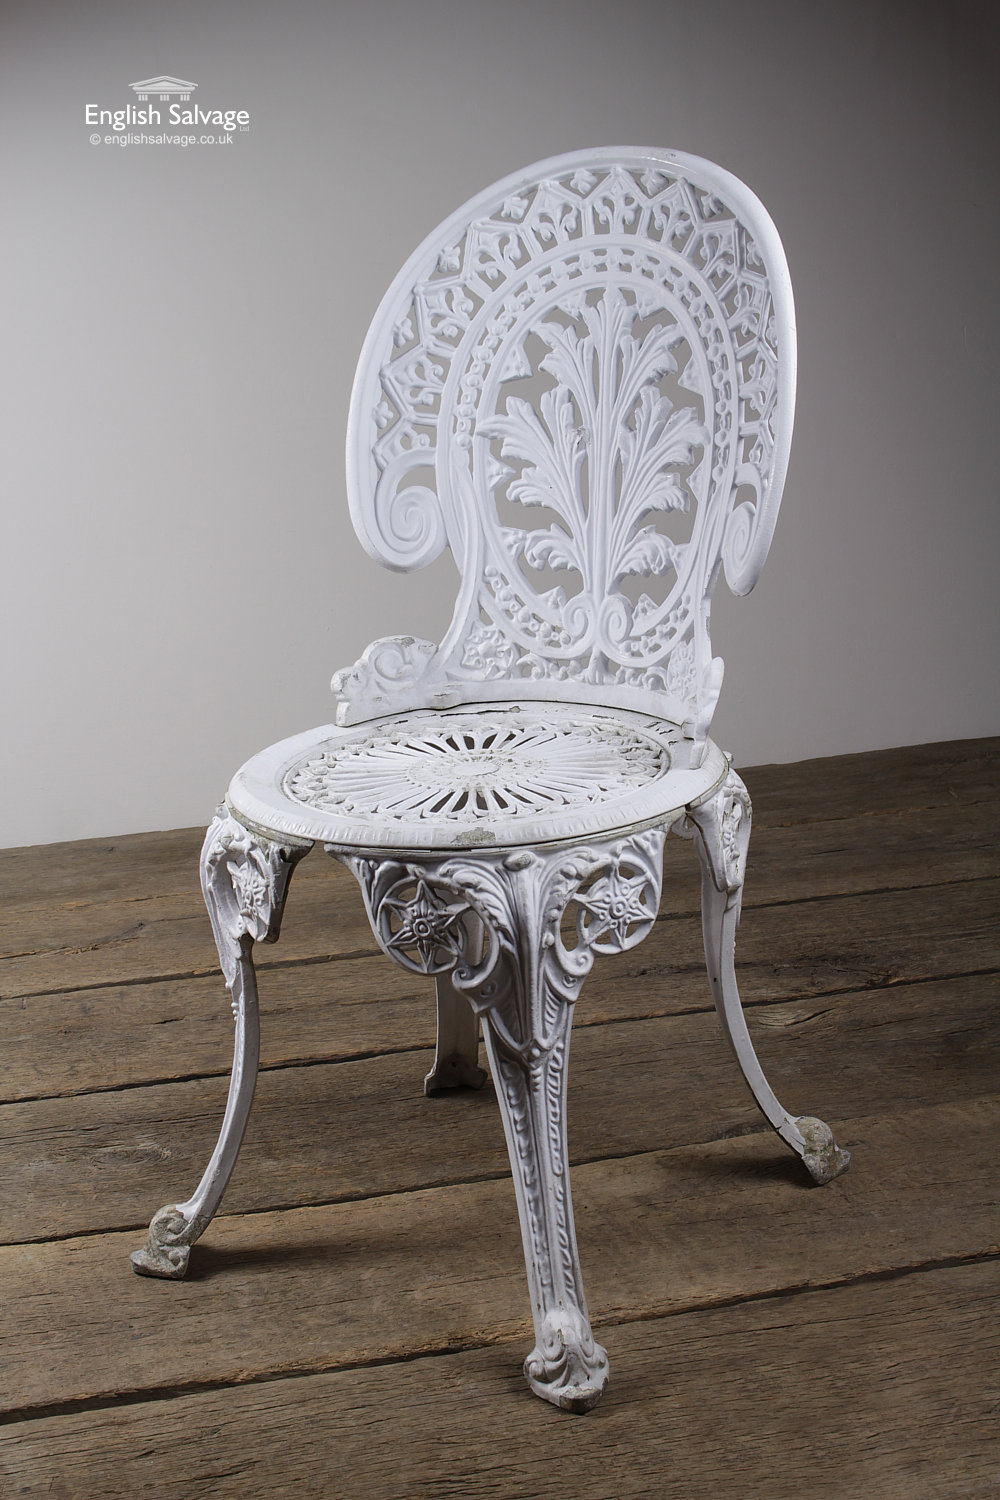 Reclaimed White Garden Table and Chair Set